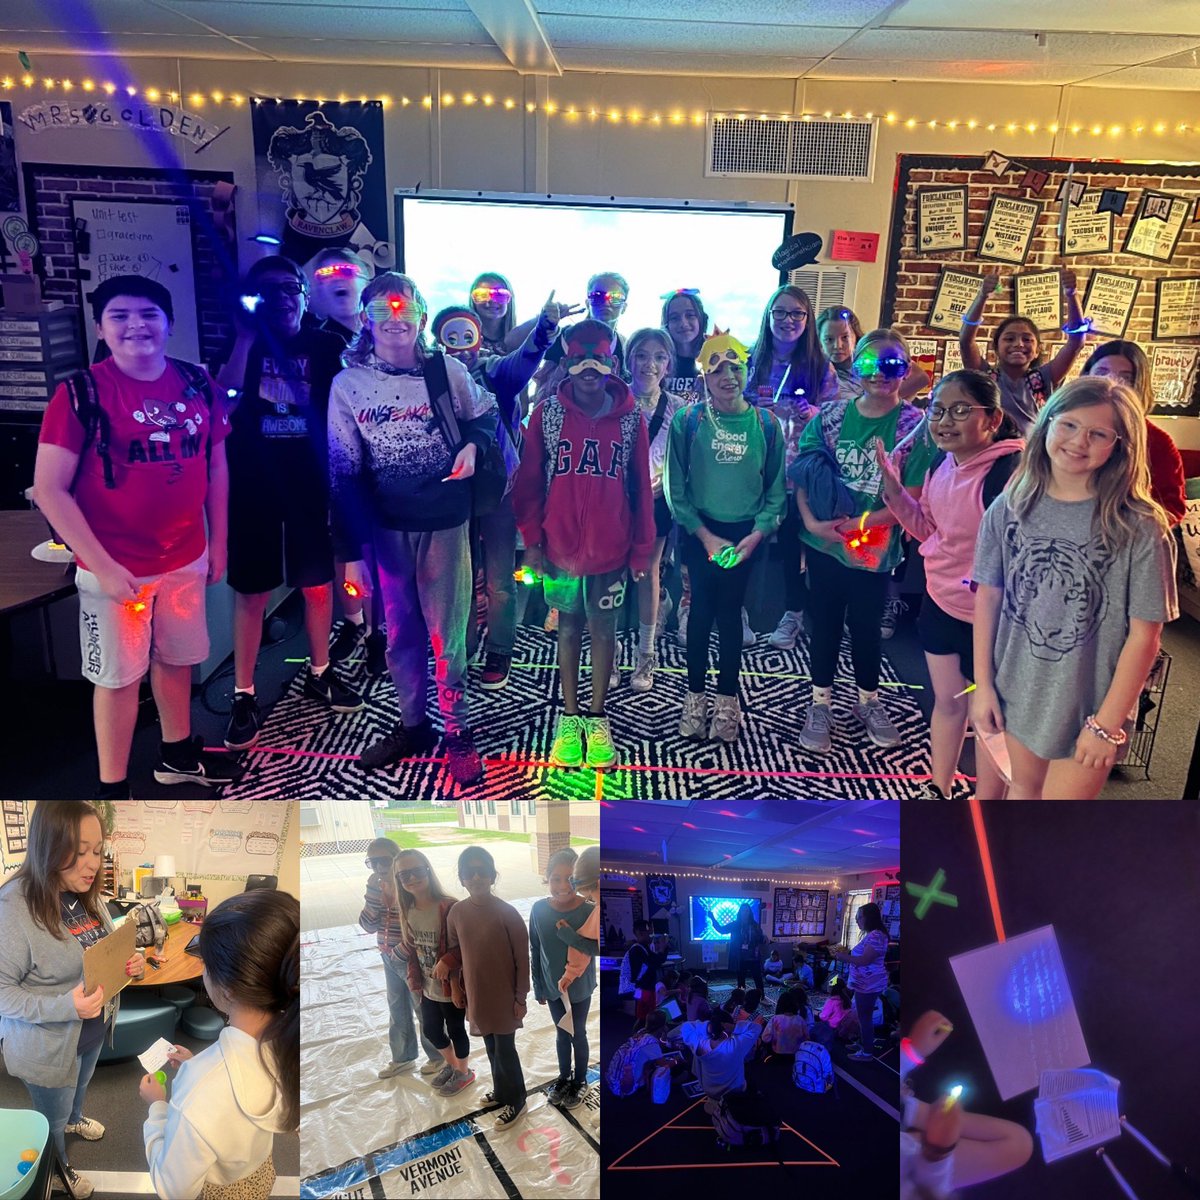 A highlight from the last 4 weeks has been our morning Level Up Camp! Our @TISDGOES tigers arrived early to practice & review essential skills! Revise and edit Easter egg hunts, Monopoly Comprehension, and two final ECR Glow Day reviews #GObethegamechanger